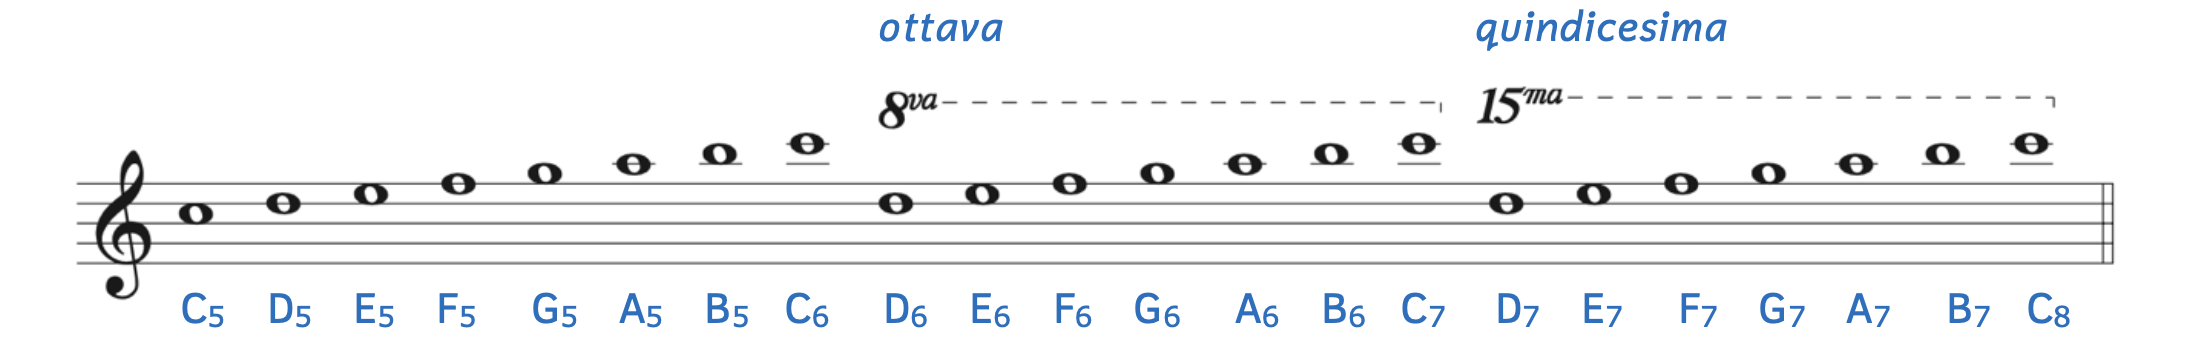 High treble clef pitches using octave signs. The example begins with C5 and ascends to C6. At D6, the D appears to be D5 but the Ottava sign (8, v, a) is written above, which tells the musician the note is actually an octave higher. The notes ascend to C7. At D7, the D again appears to be D5 but the quindicesmia sign (15, m, a) is written above, which tells the musician the note is actually two octaves higher. The notes ascend to C8.